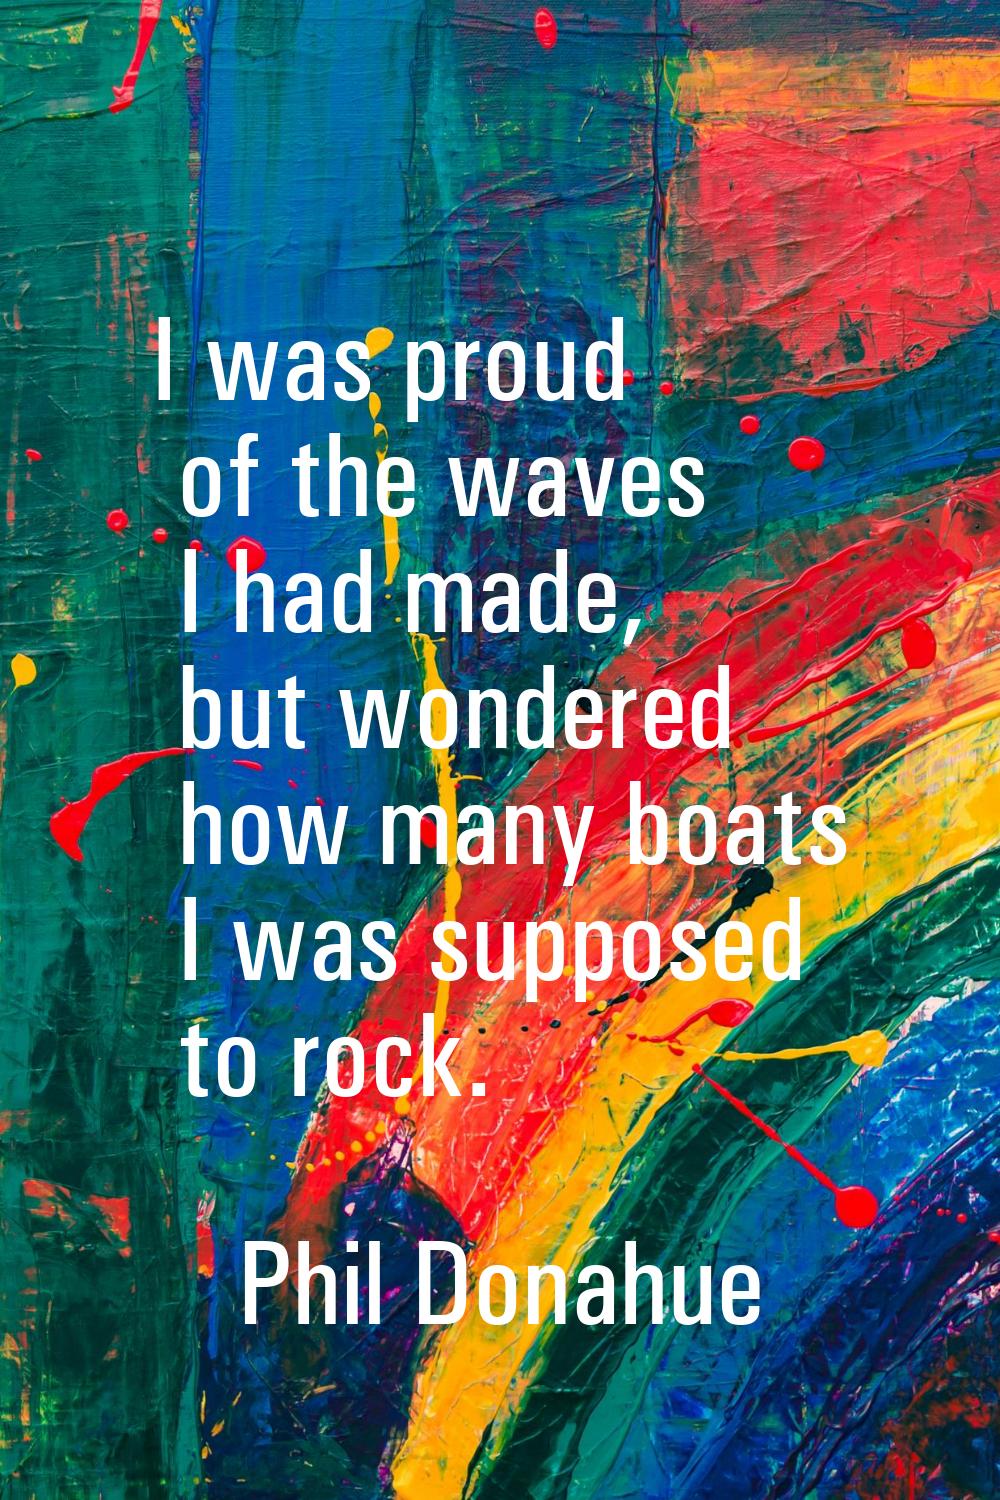 I was proud of the waves I had made, but wondered how many boats I was supposed to rock.